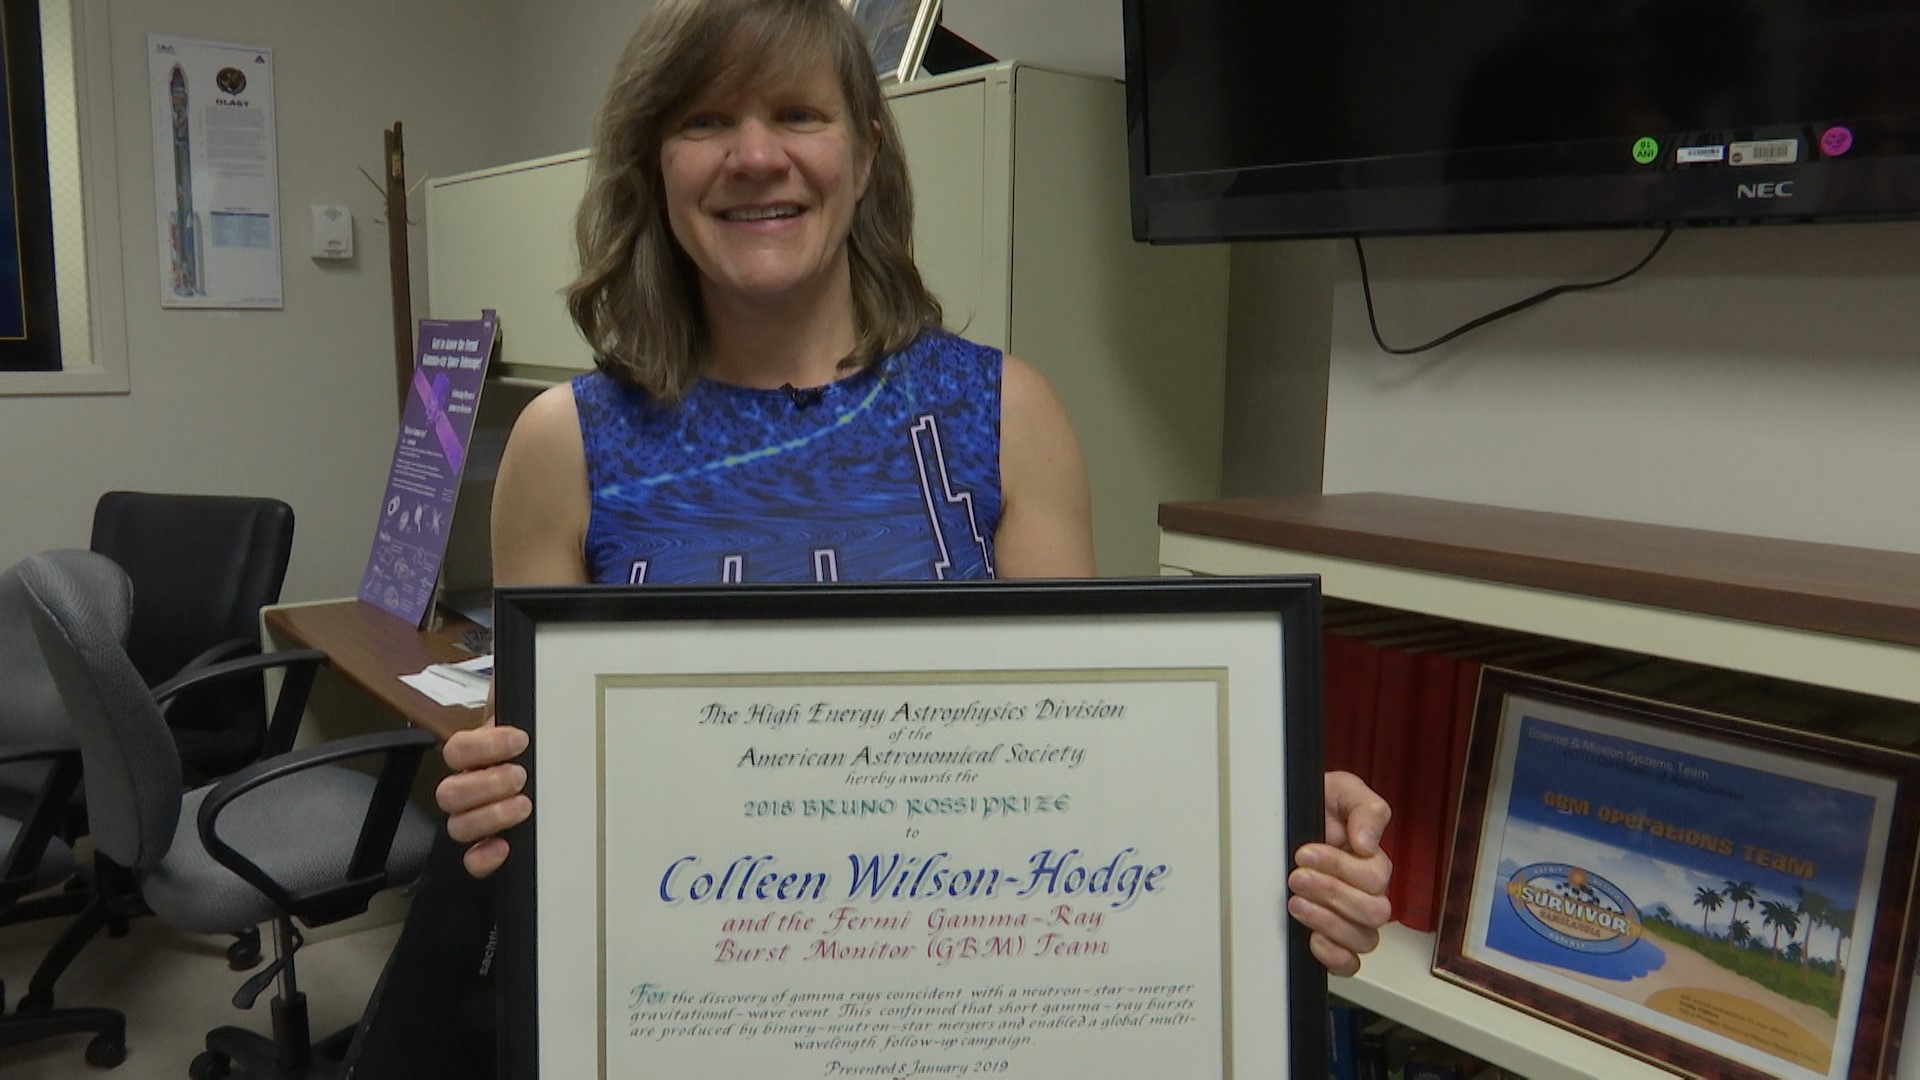 Dr. Colleen Wilson-Hodge's story is a story of discovery.